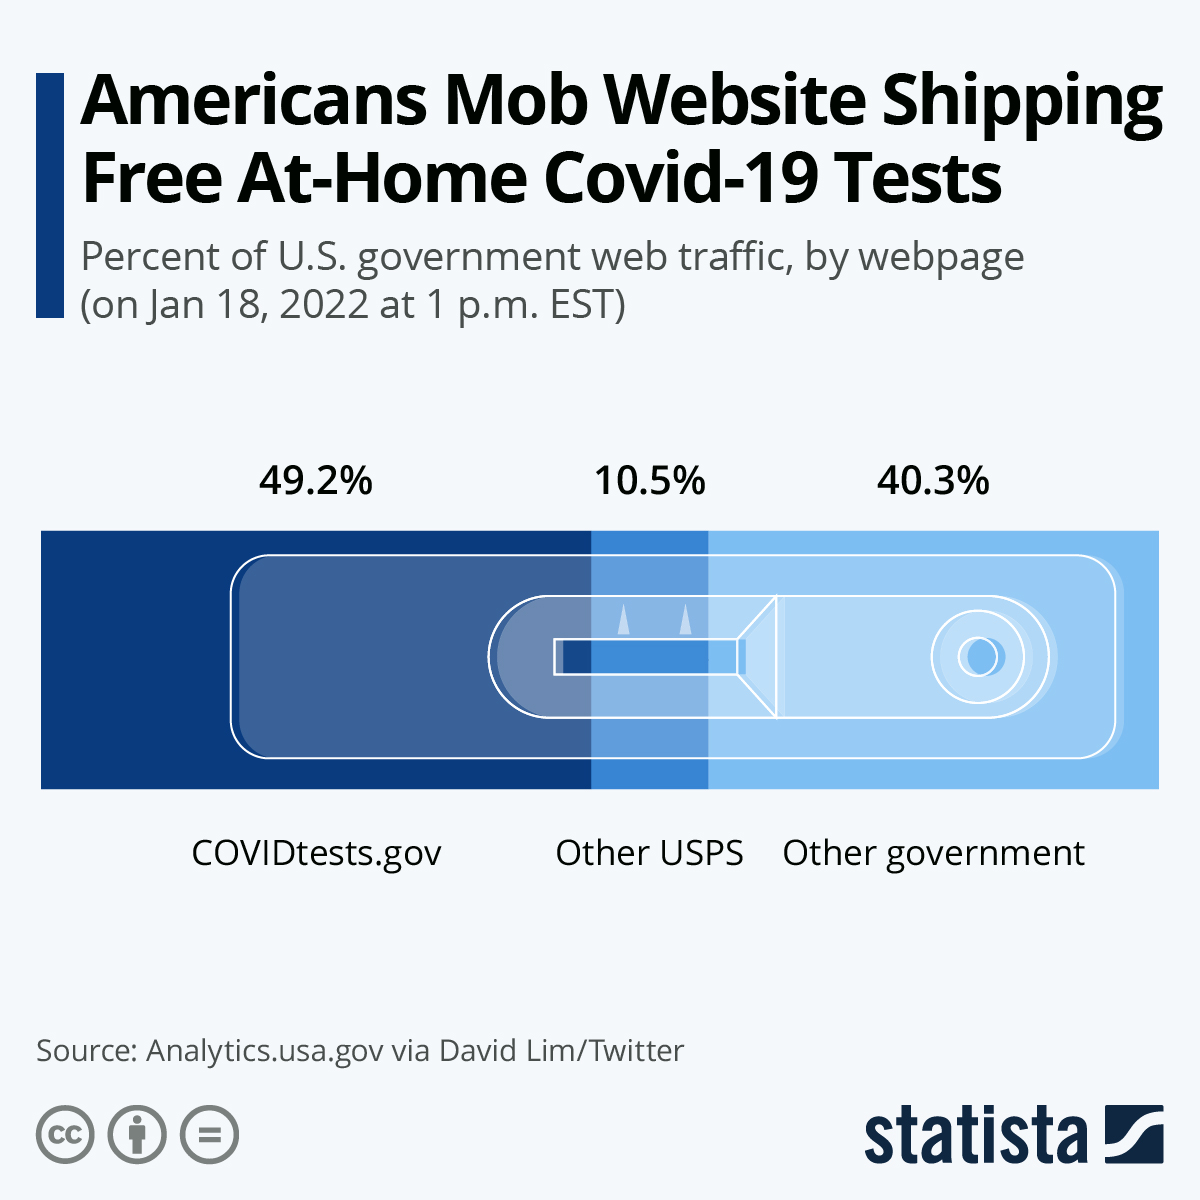 Americans Mob Website Shipping Free At-Home Covid-19 Tests